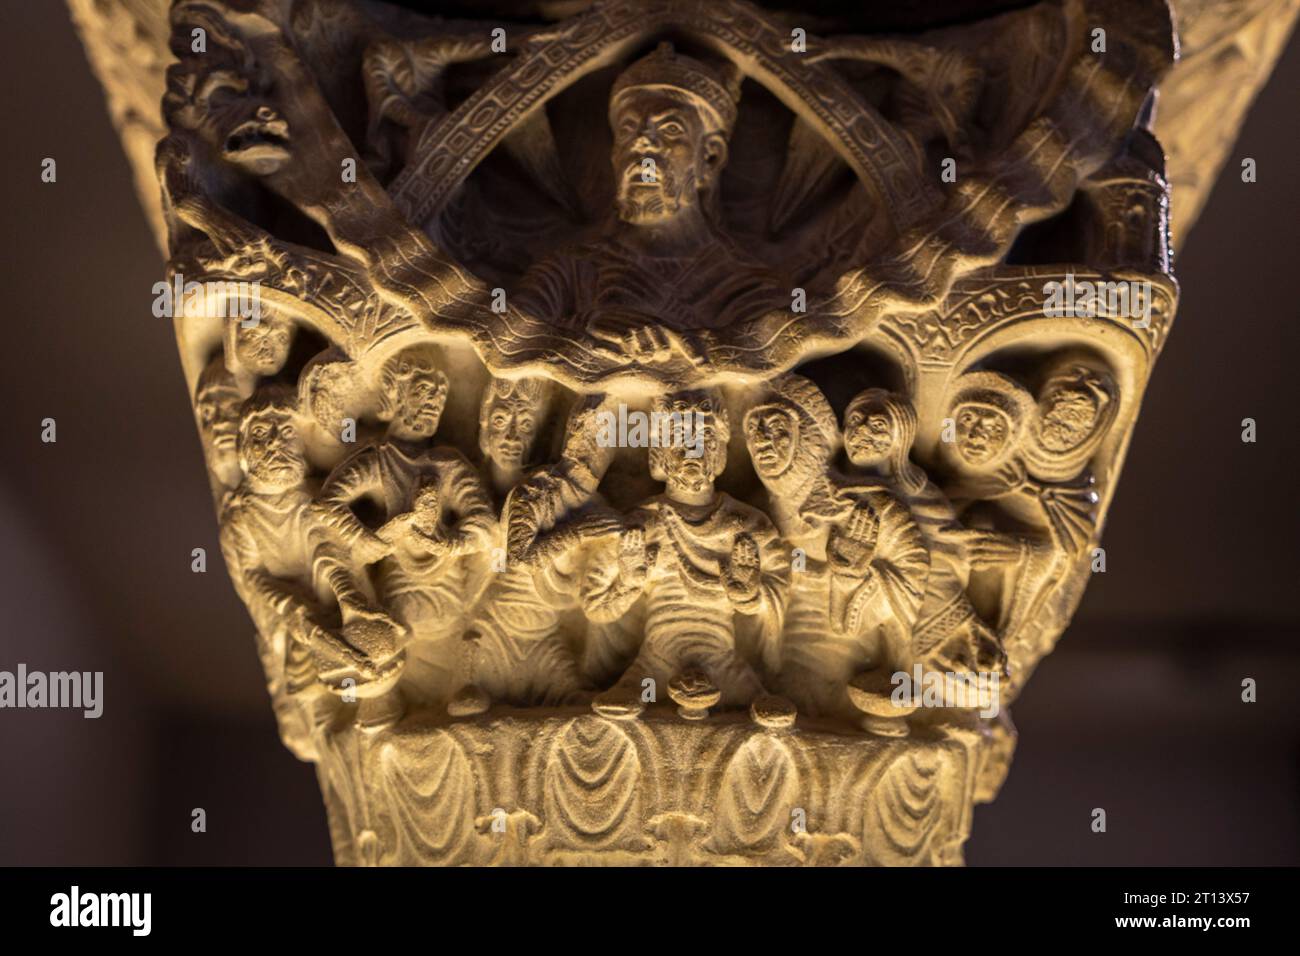 Romanesque capital with scene from the life of Job, 12th century, workshop of the master of the cloister of Pamplona cathedral, Museum of Navarra, Pam Stock Photo